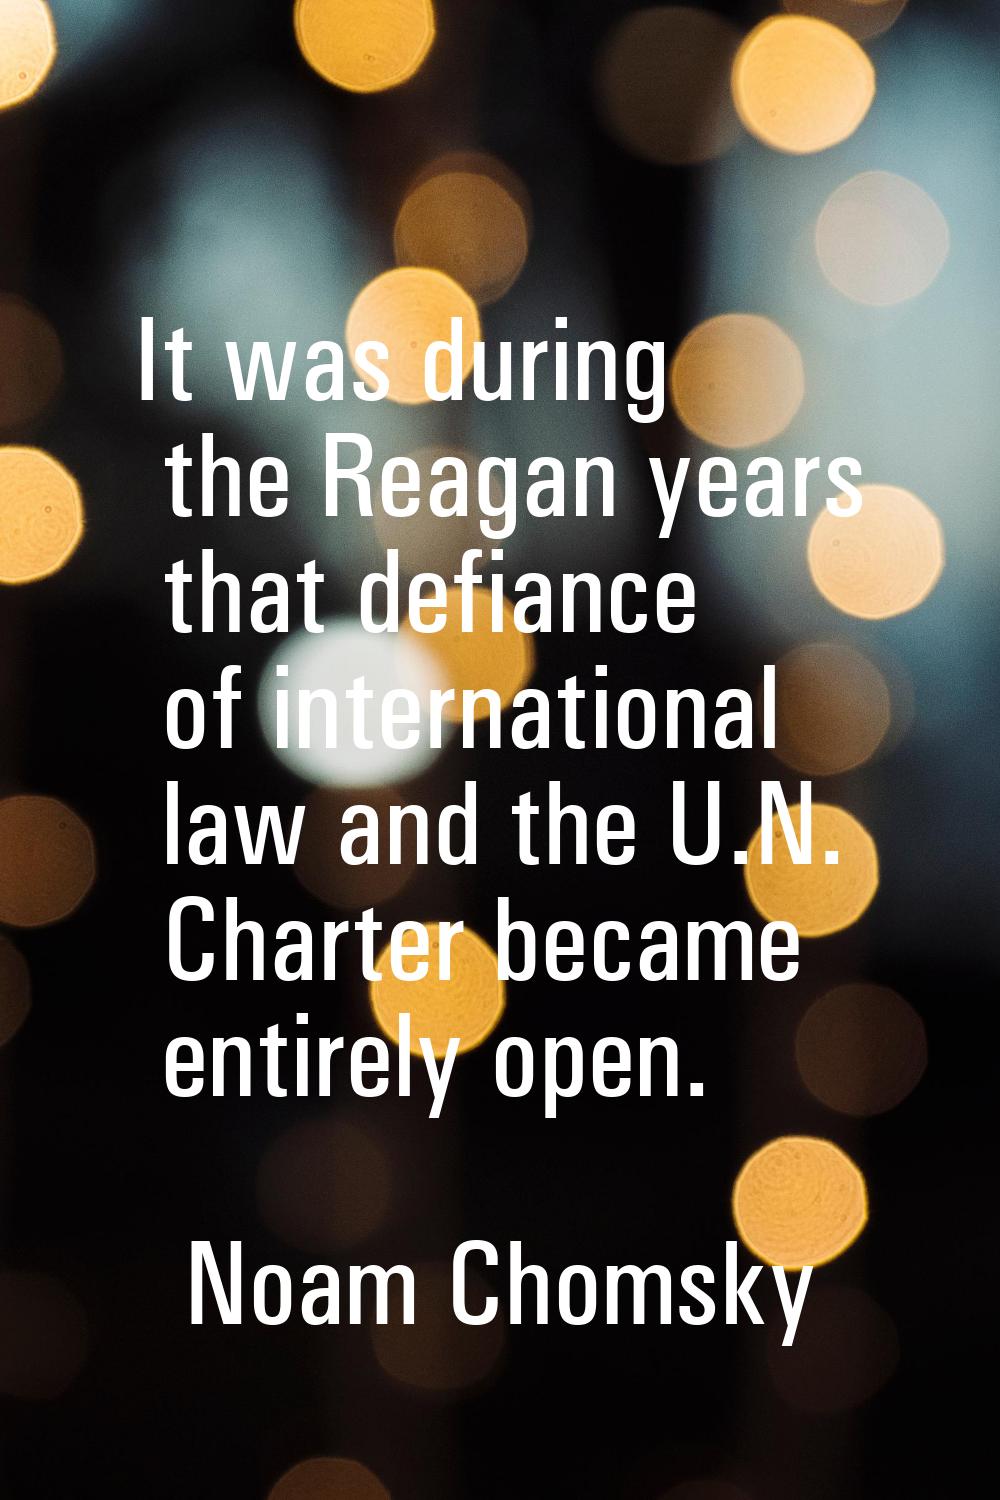 It was during the Reagan years that defiance of international law and the U.N. Charter became entir